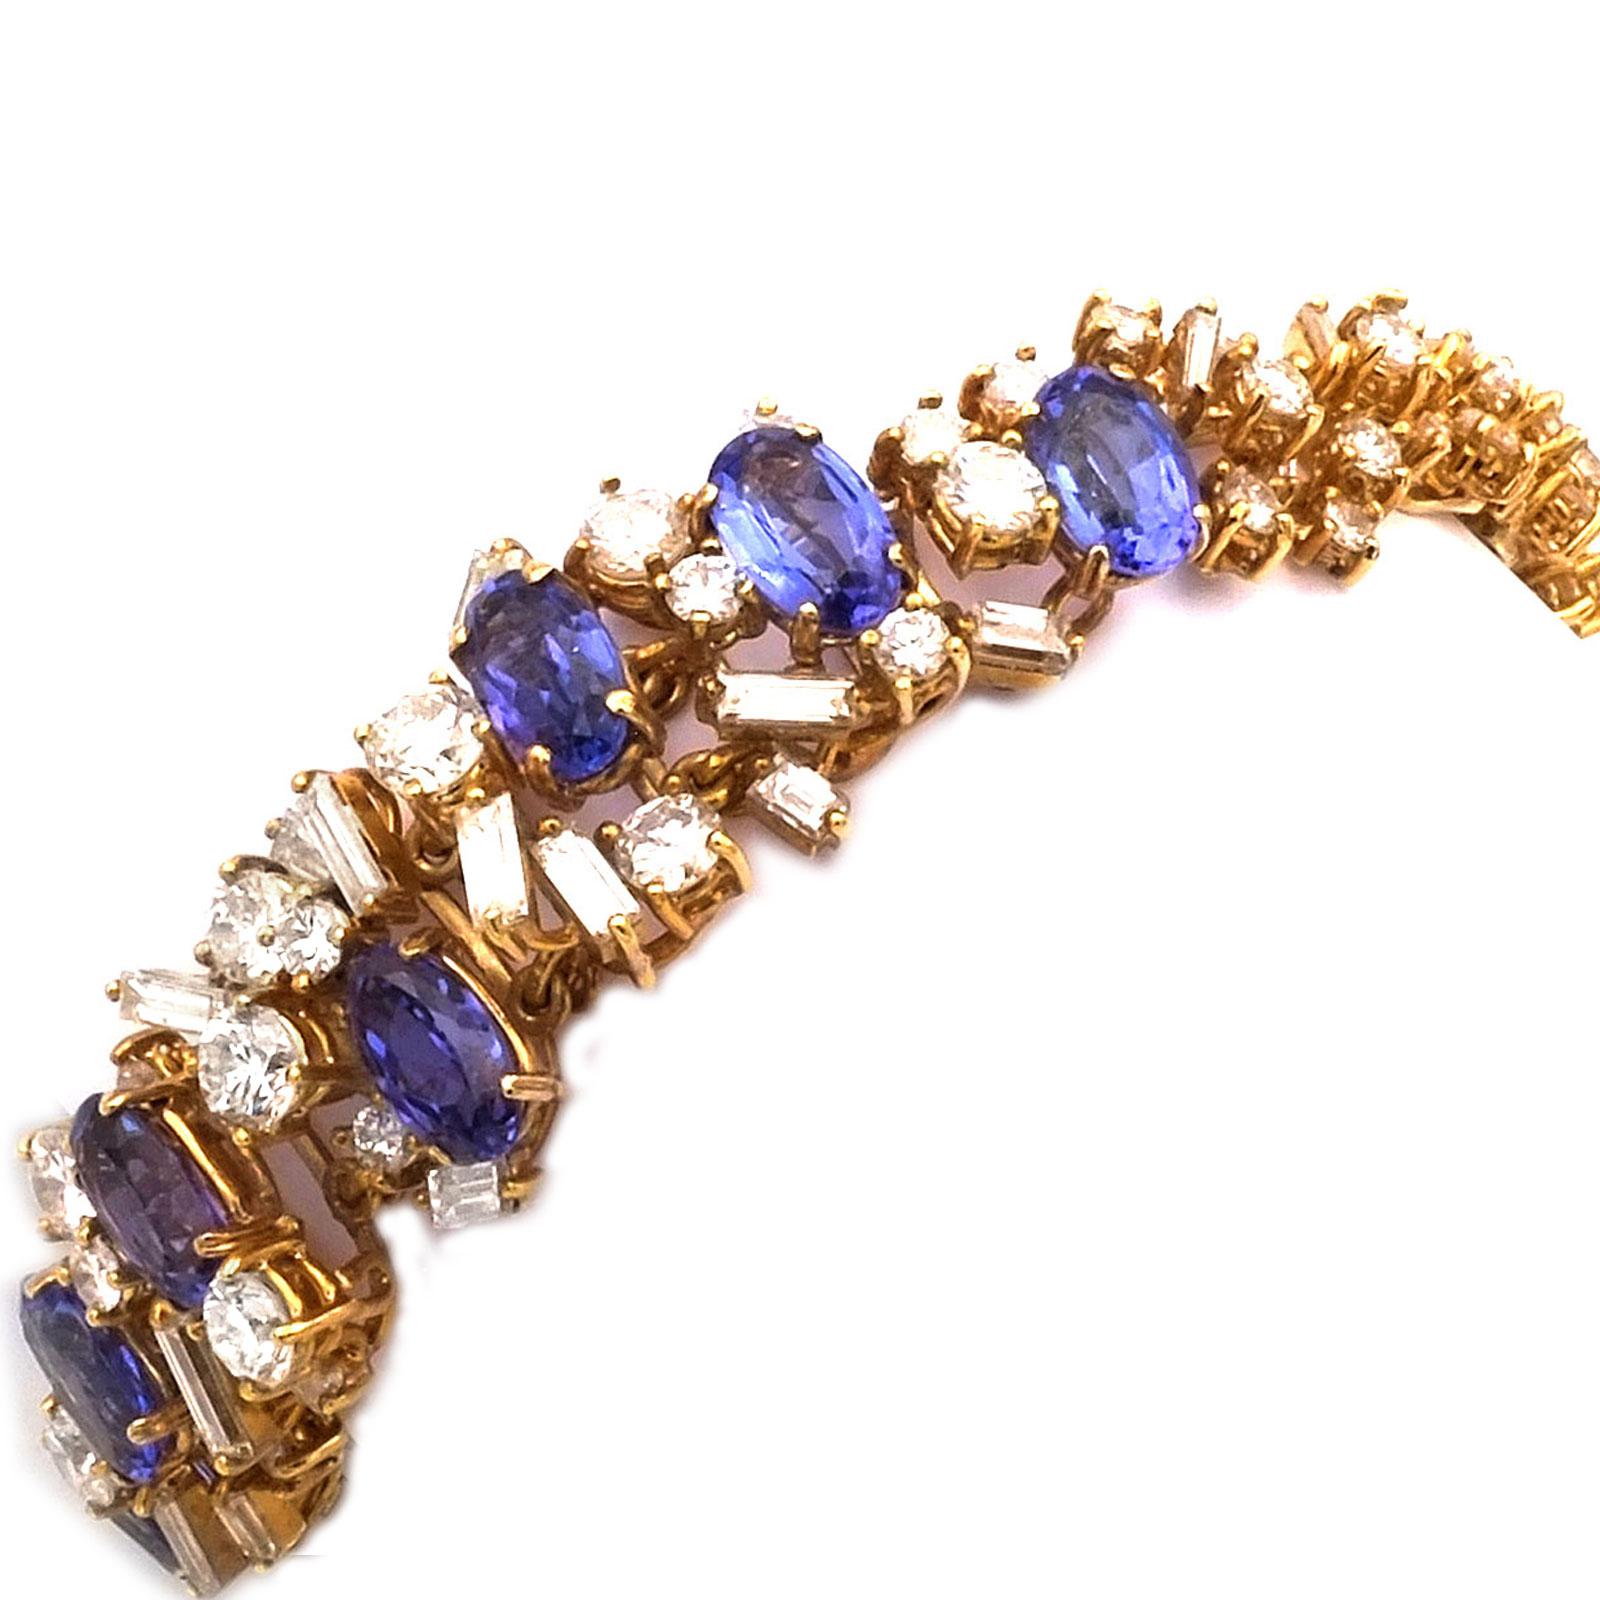 Tanzanite and 12 Carat Diamond Bracelet in 18K Gold, circa 1970

Very distinctive, floral bracelet made of high-carat gold, openwork and set with 8 bright blue-violet tanzanites with a total of 7.65 ct, surrounded by 121 shining diamonds in